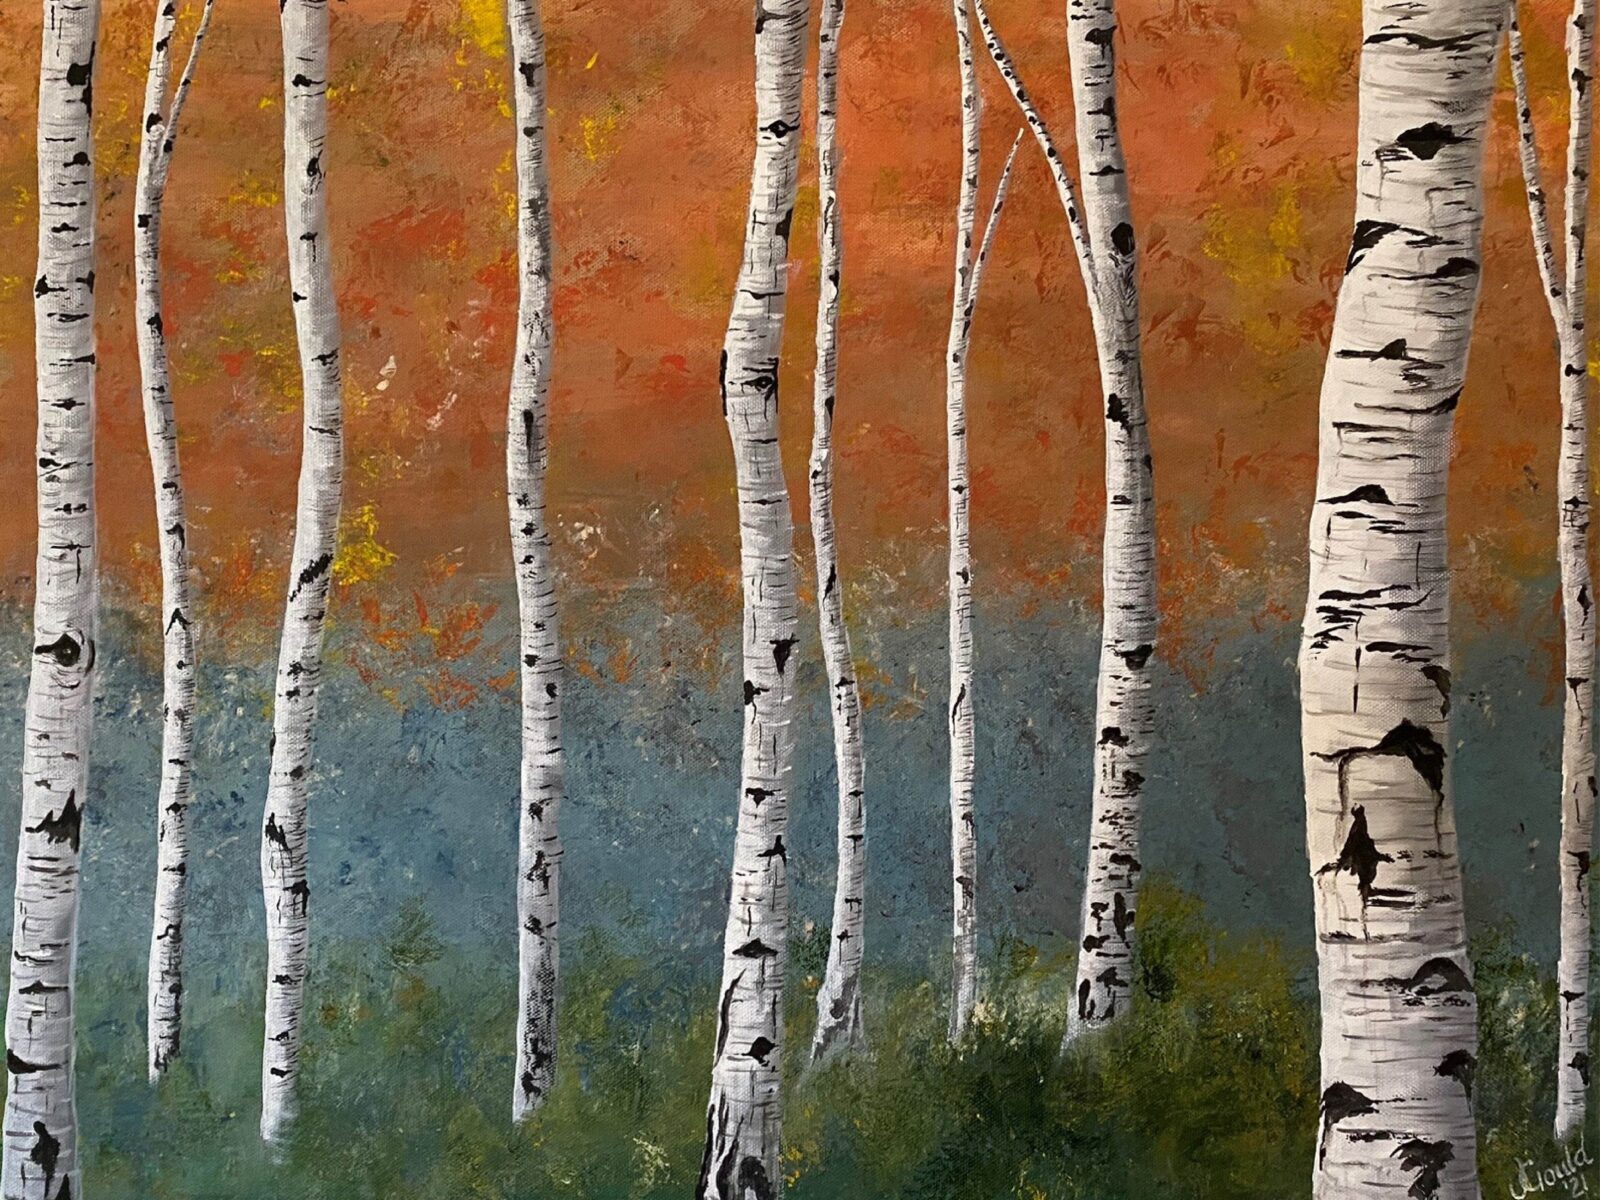 Oil painting of white birch trees on an orange and grey hazy background